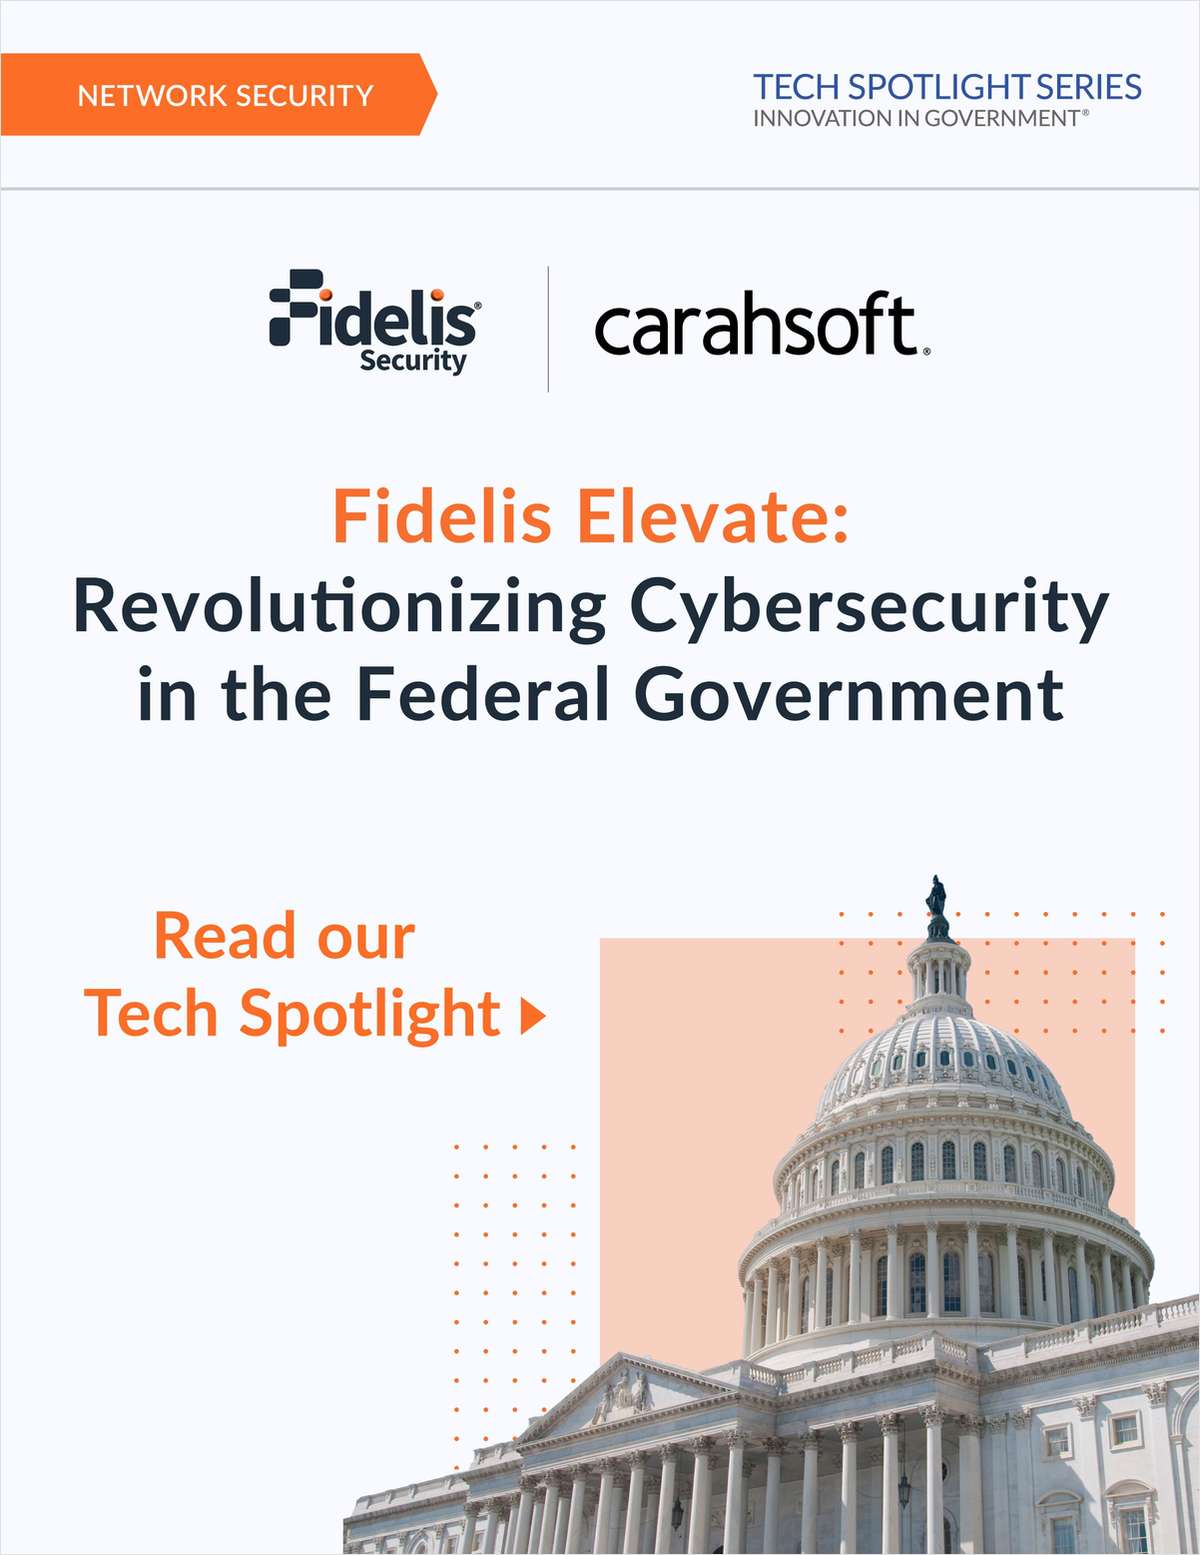 Fidelis Elevate: Revolutionizing Cybersecurity in the Federal Government